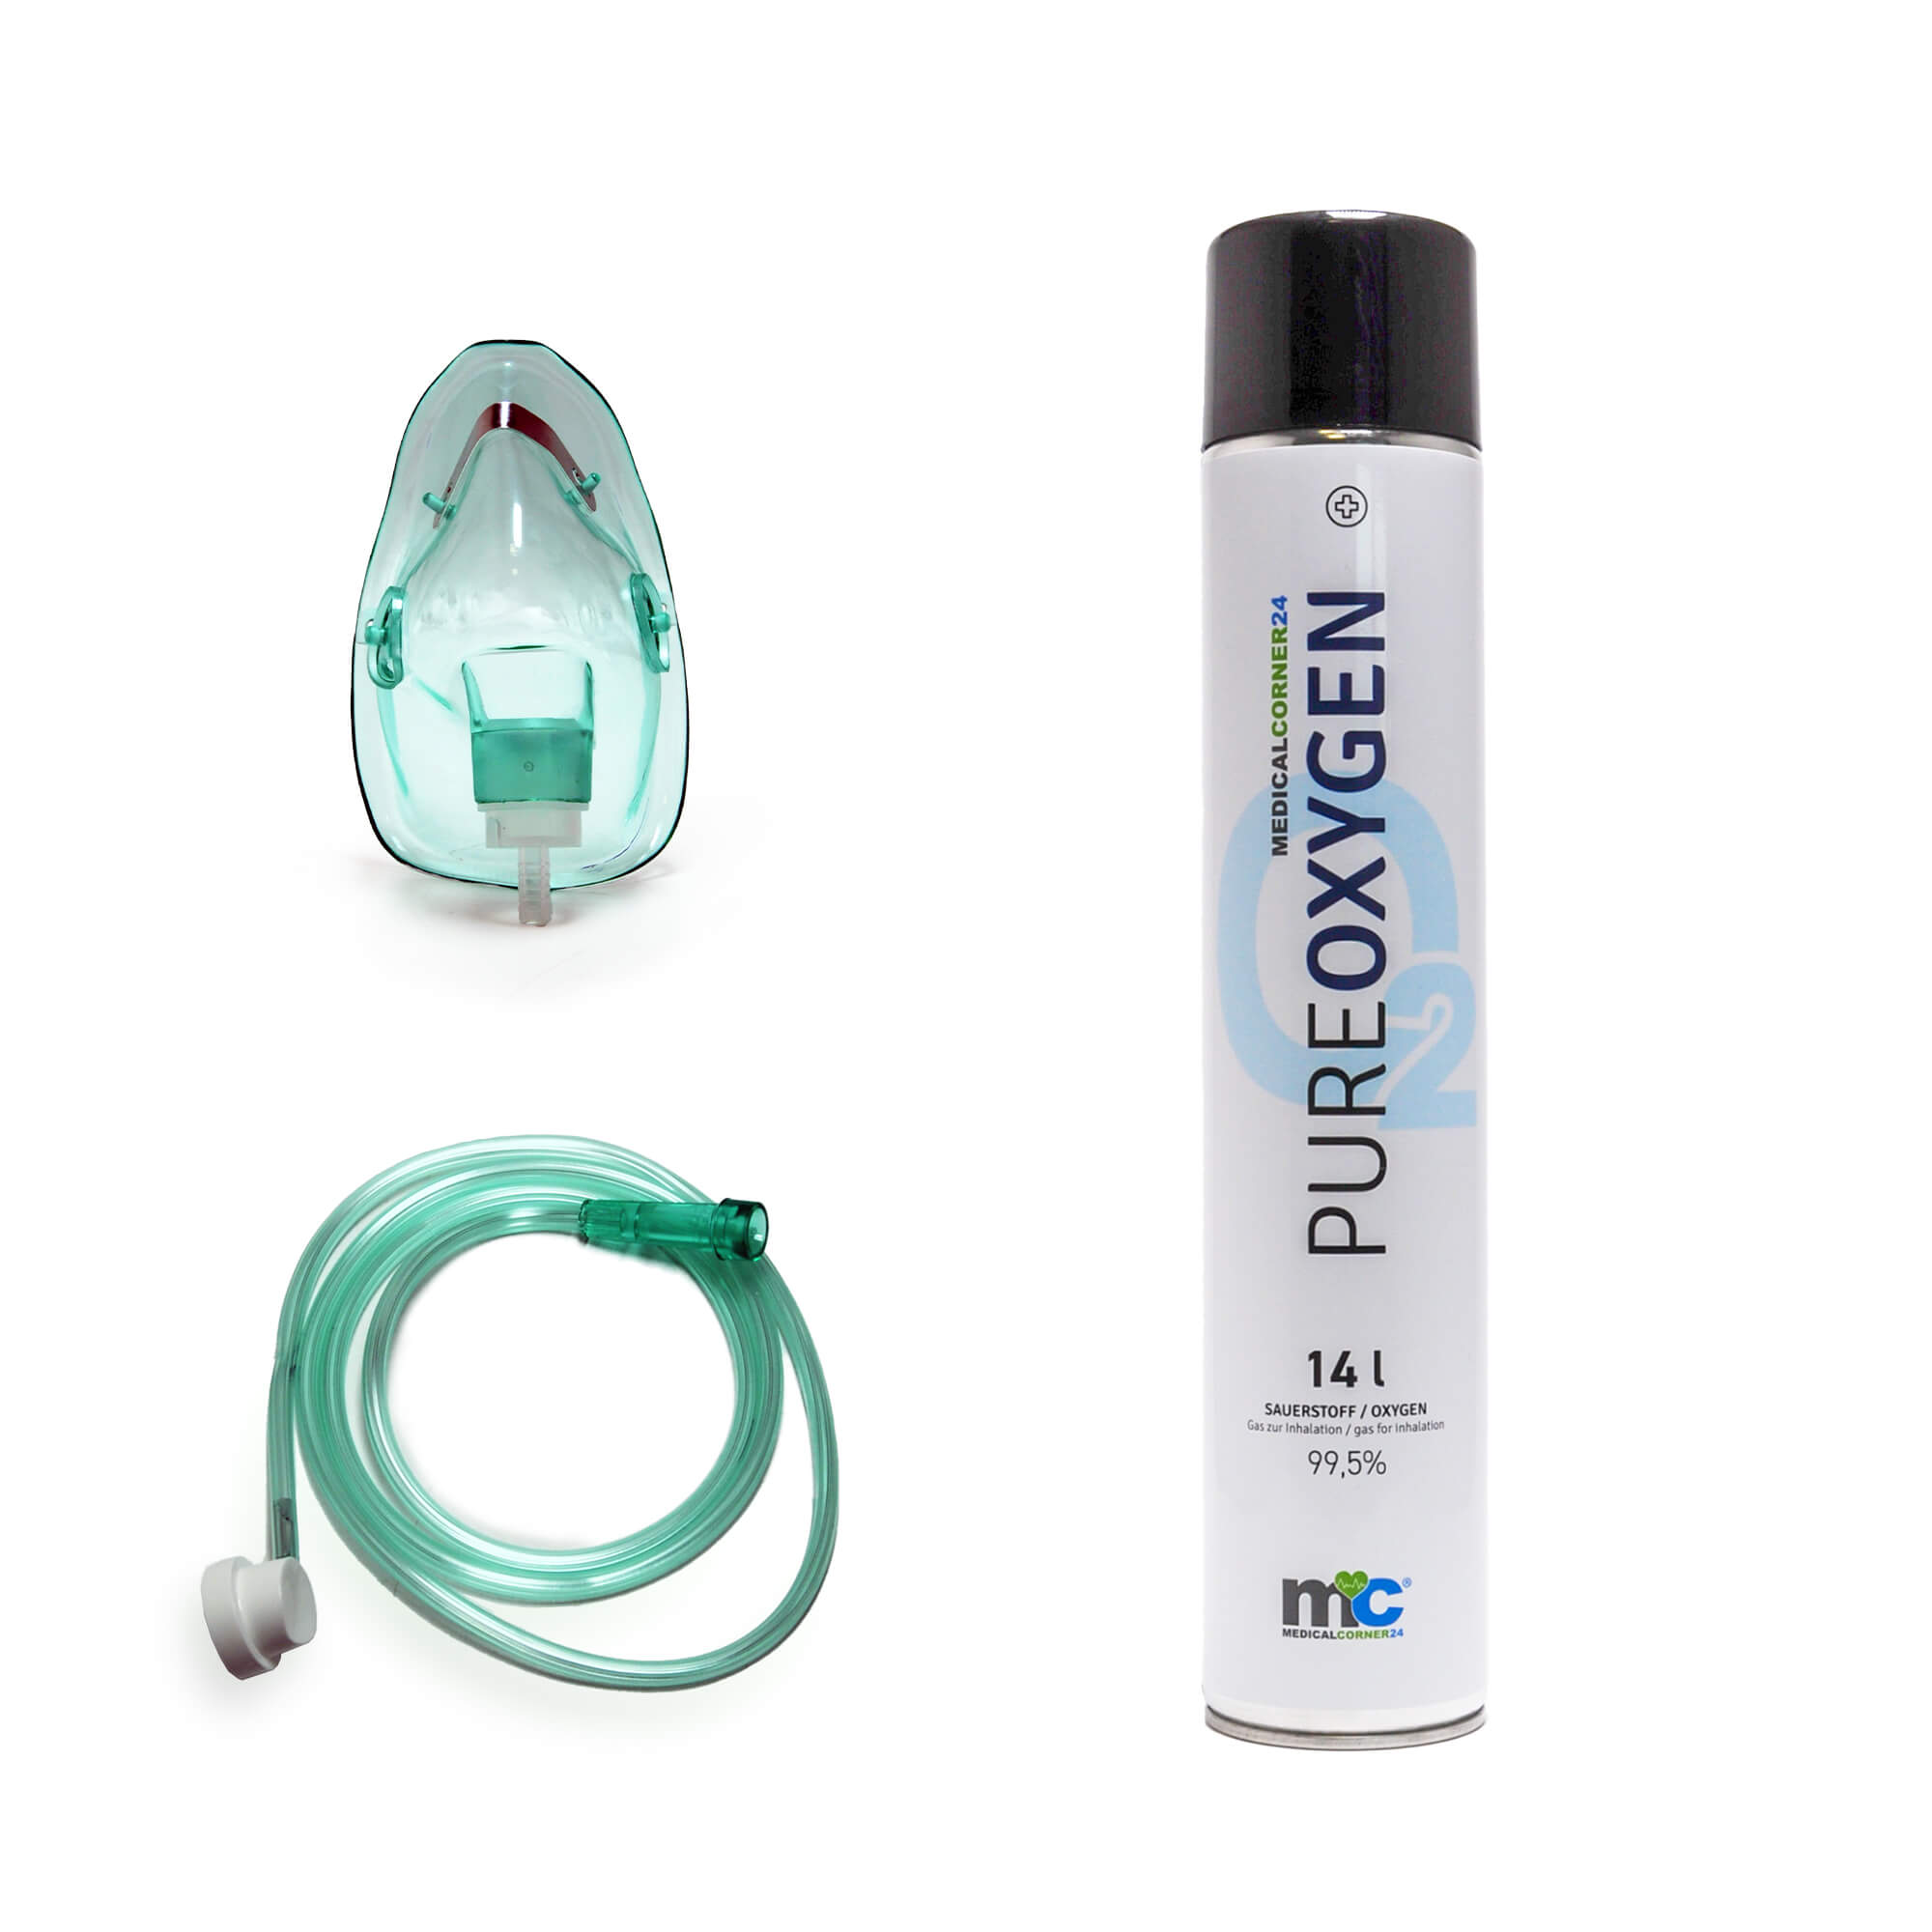 Oxygen cylinder with mask, for home / travelling, 14L oxygen